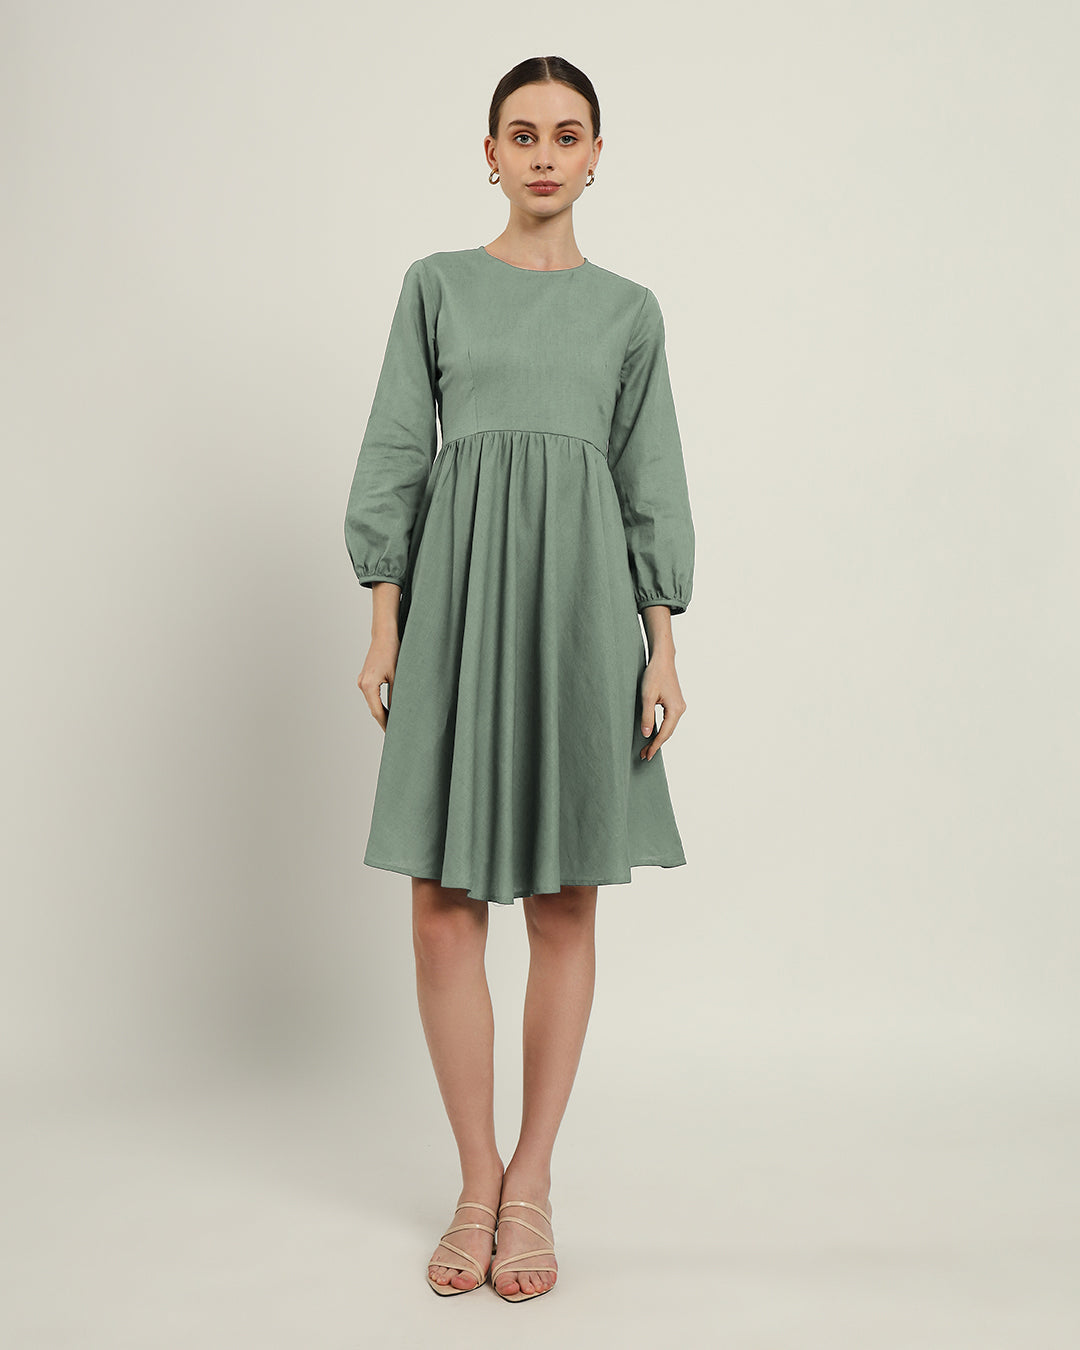 The Exeter Mint Cotton Dress